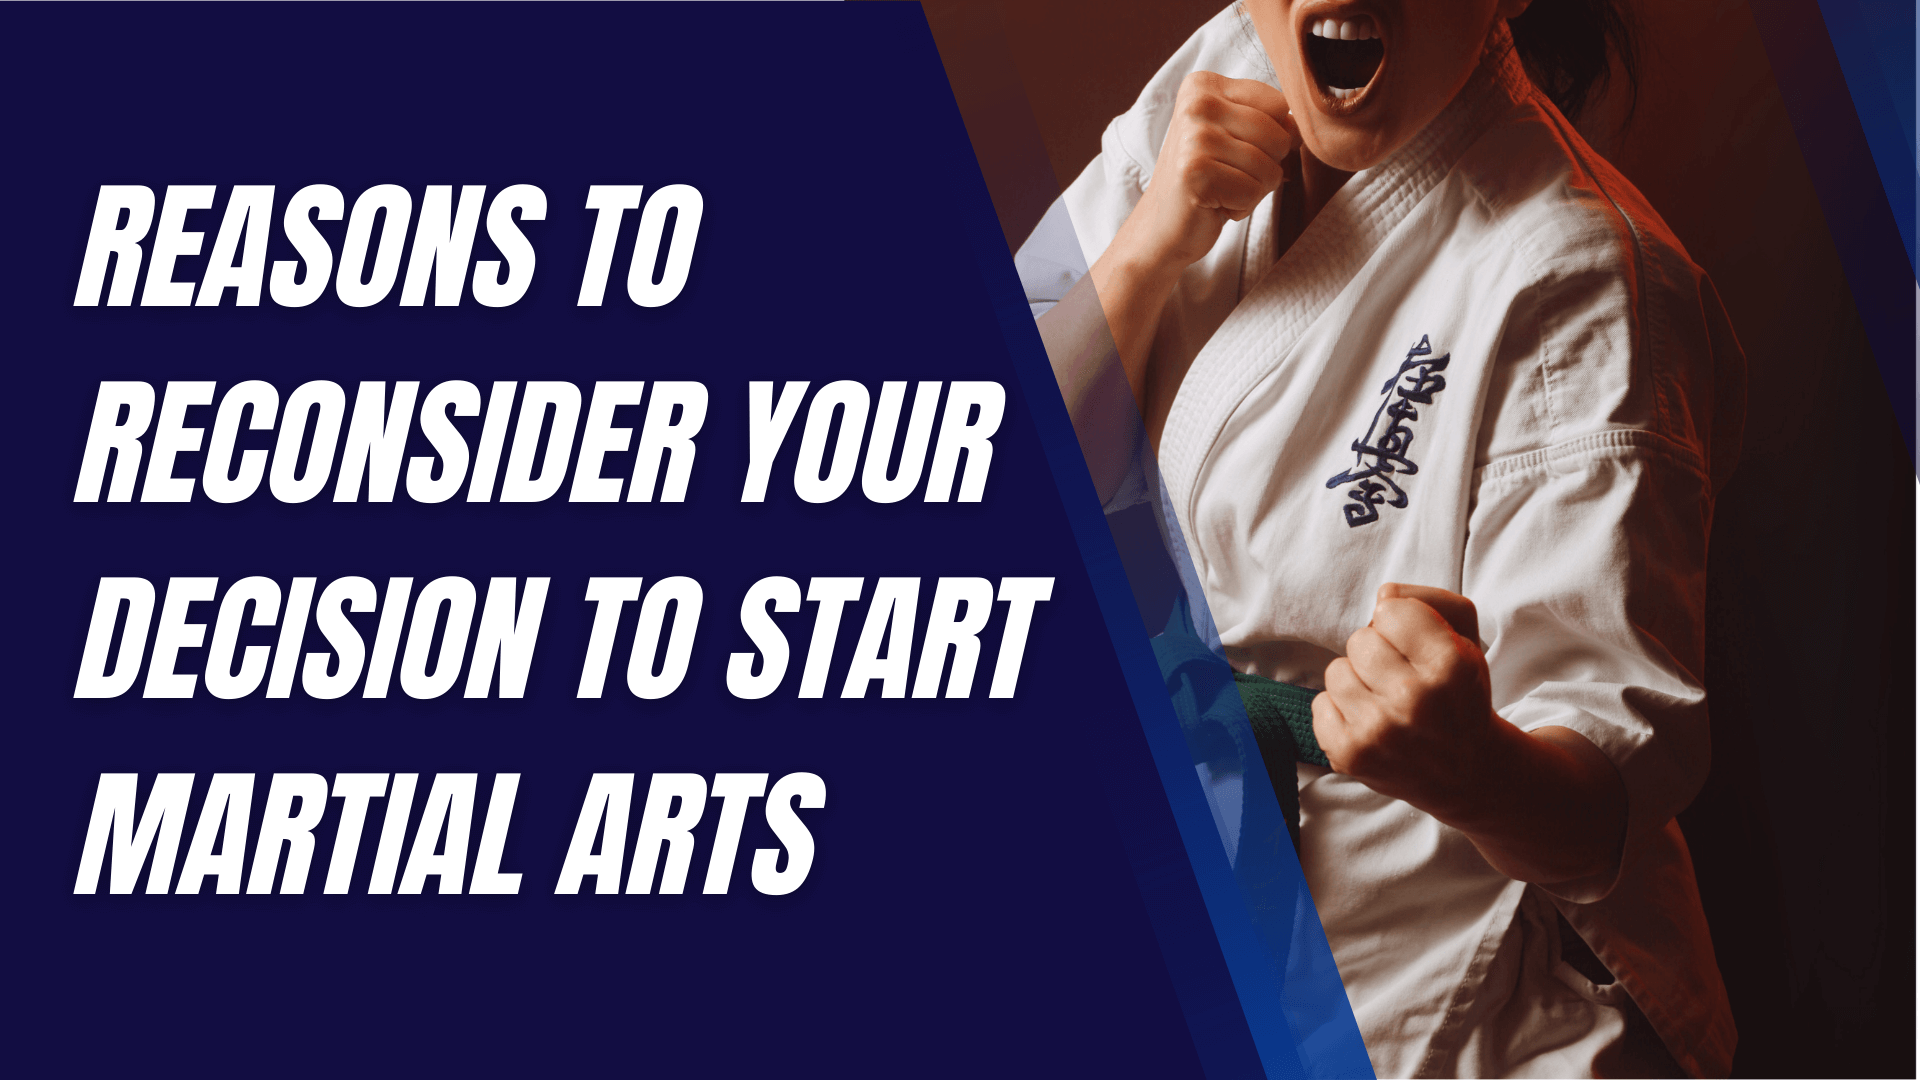 Reasons to Reconsider Your Decision to Start Martial Arts